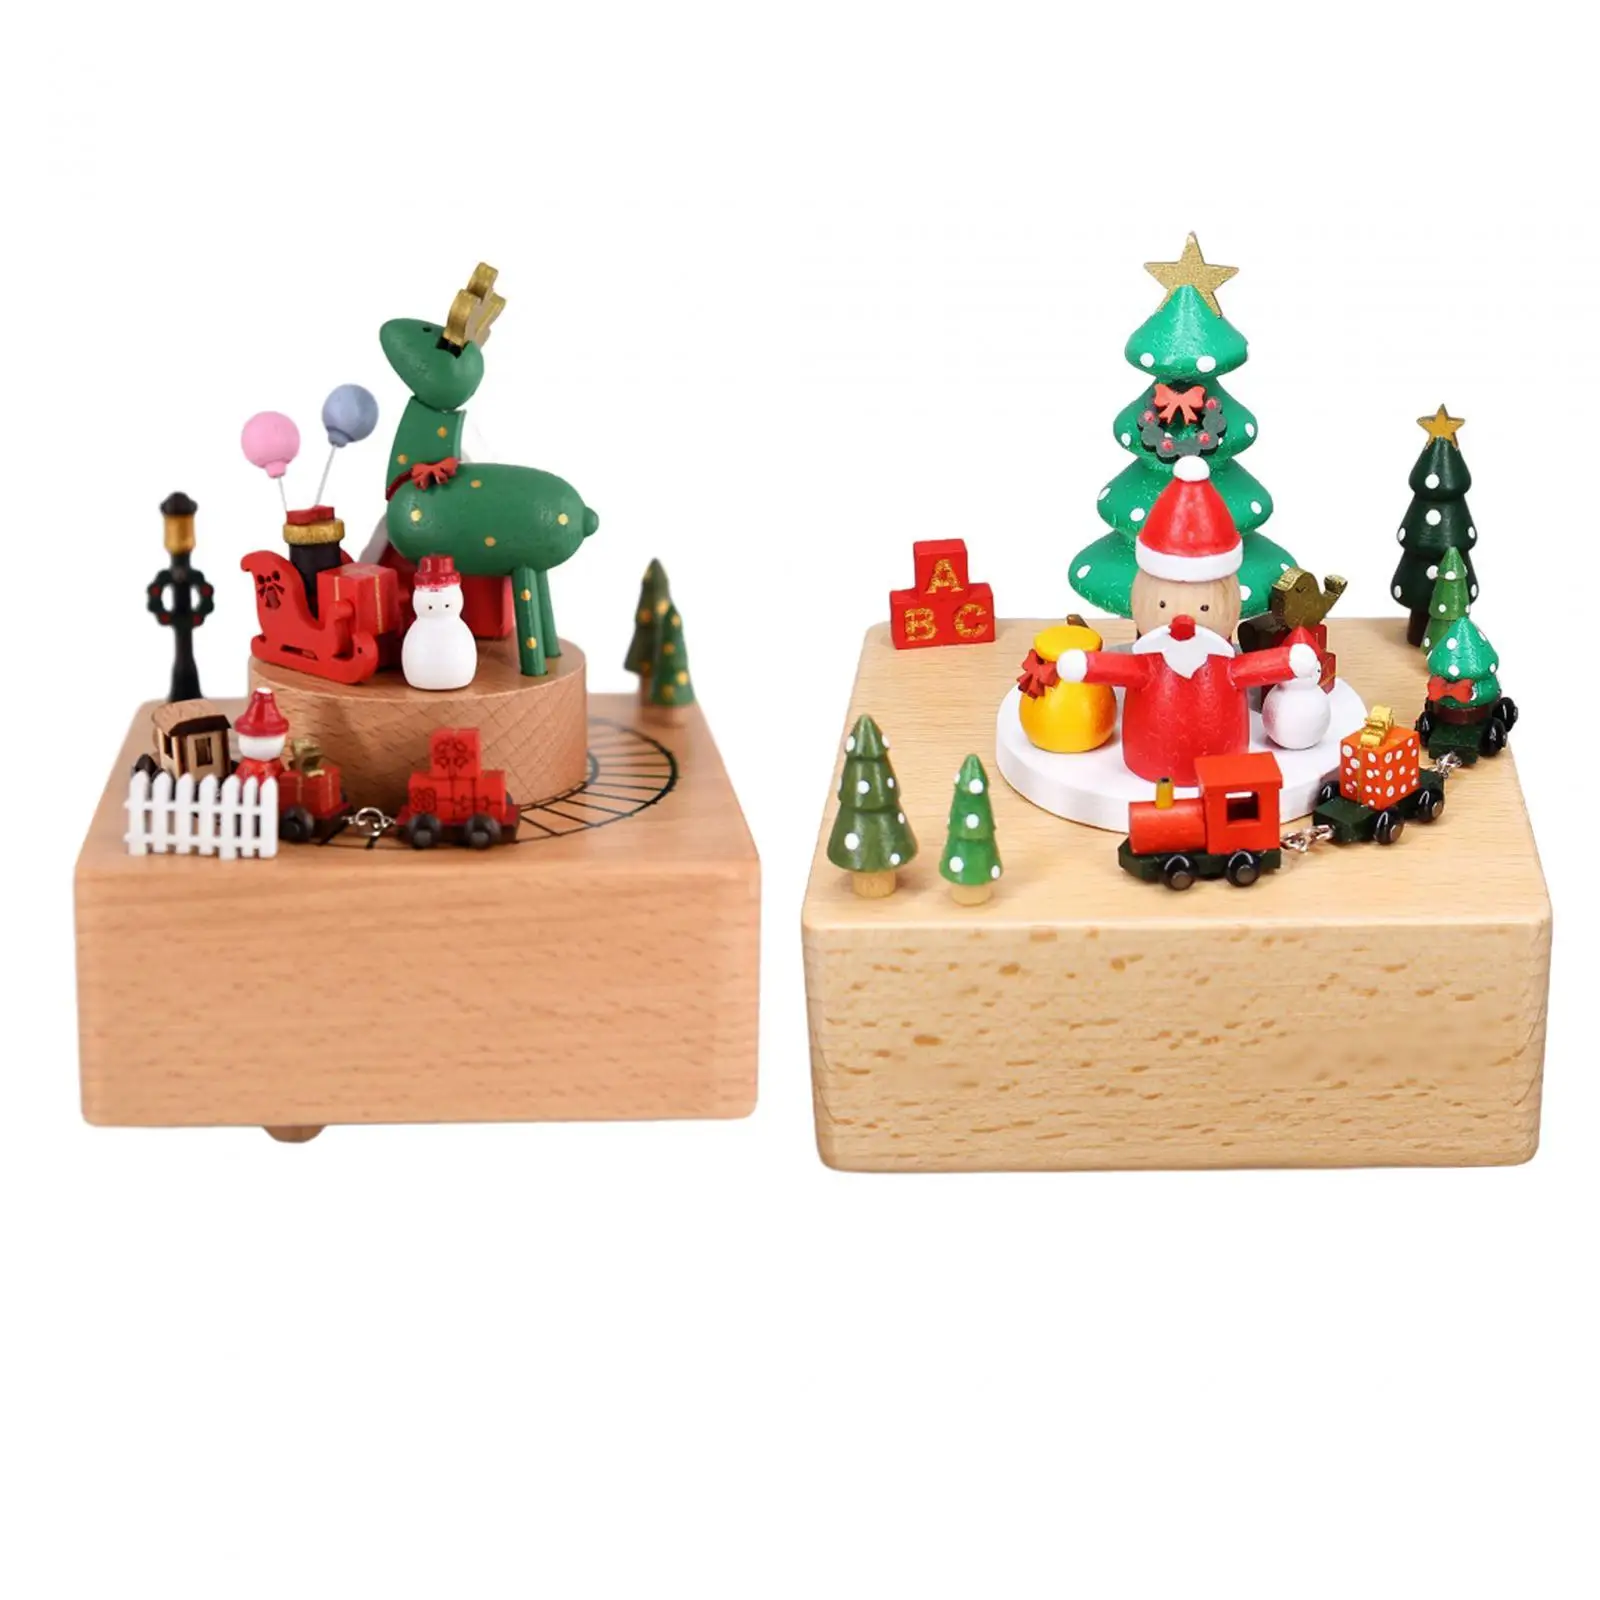 Rotating Music Box Castle Toy Christmas Themed Wind up Musical Box for Gift Birthday Anniversary Collectible Tabletop Decor